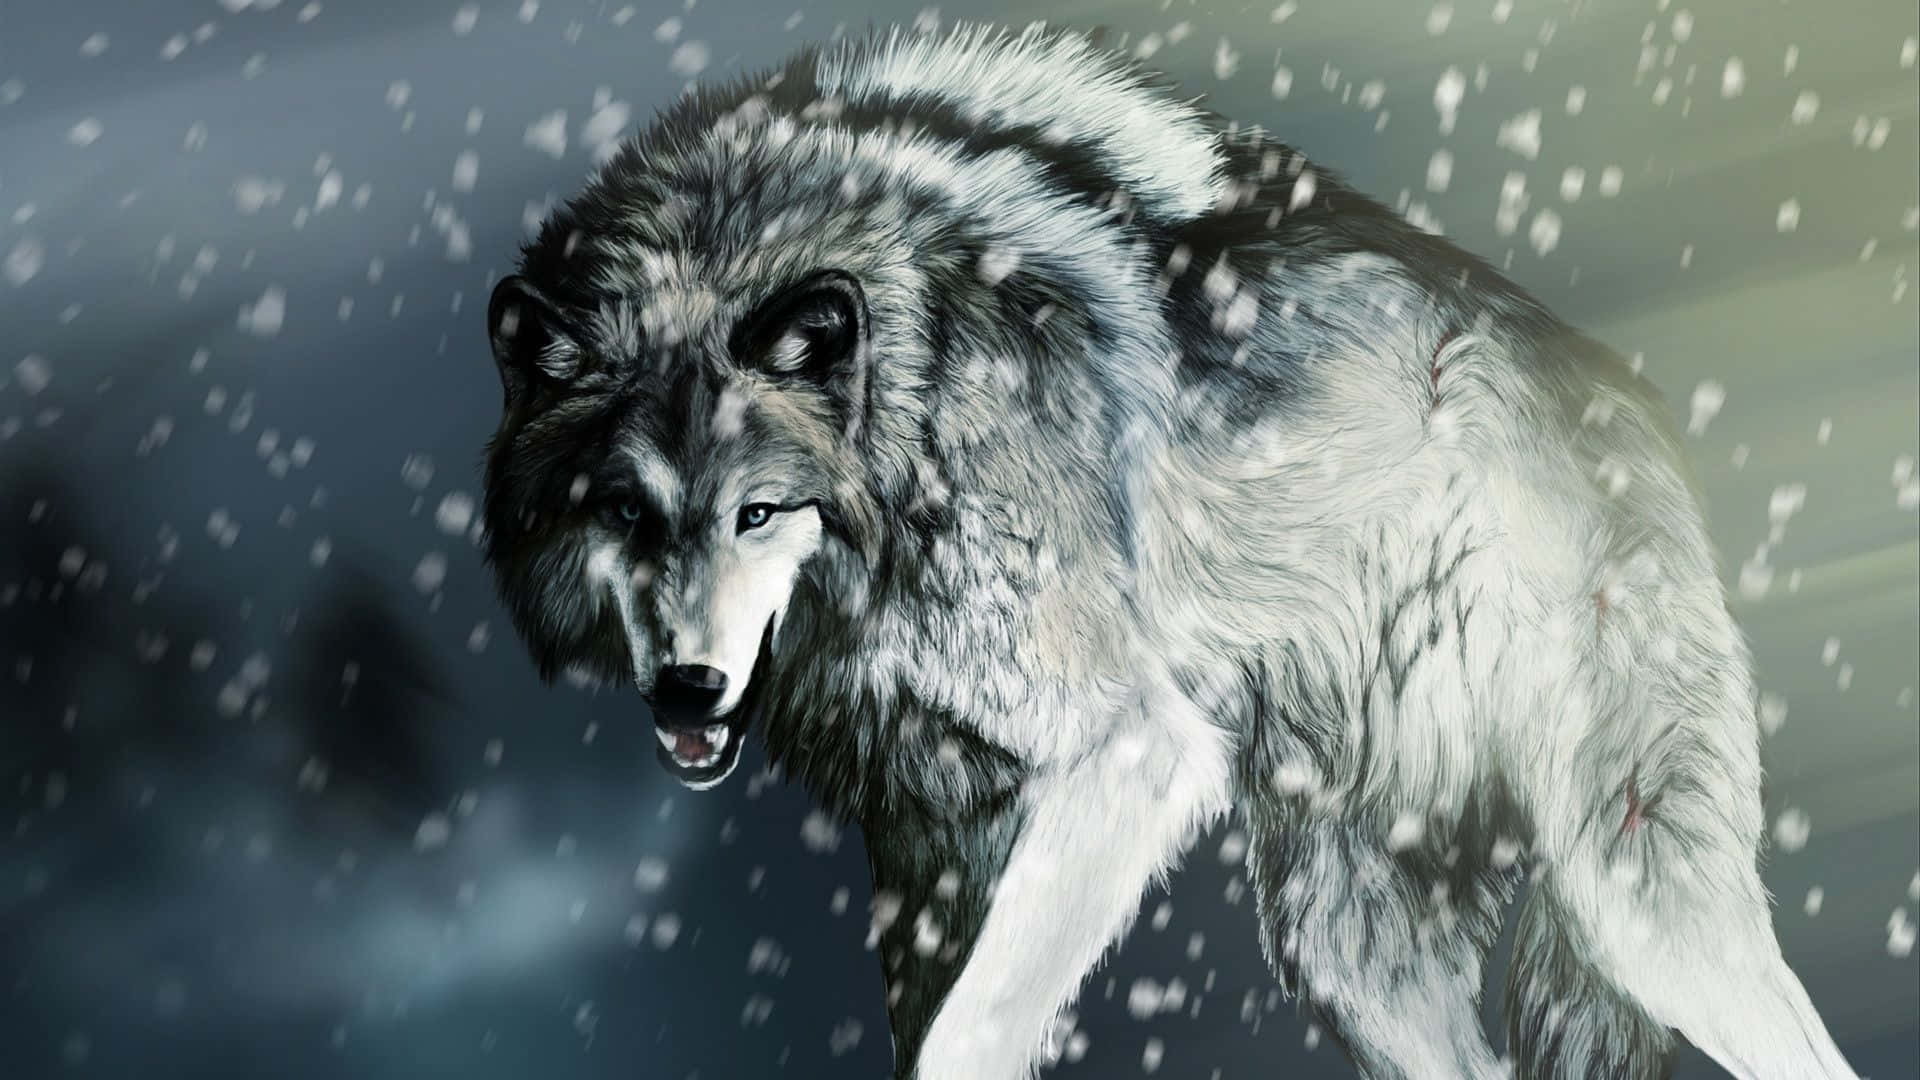 A powerful and majestic white wolf Wallpaper